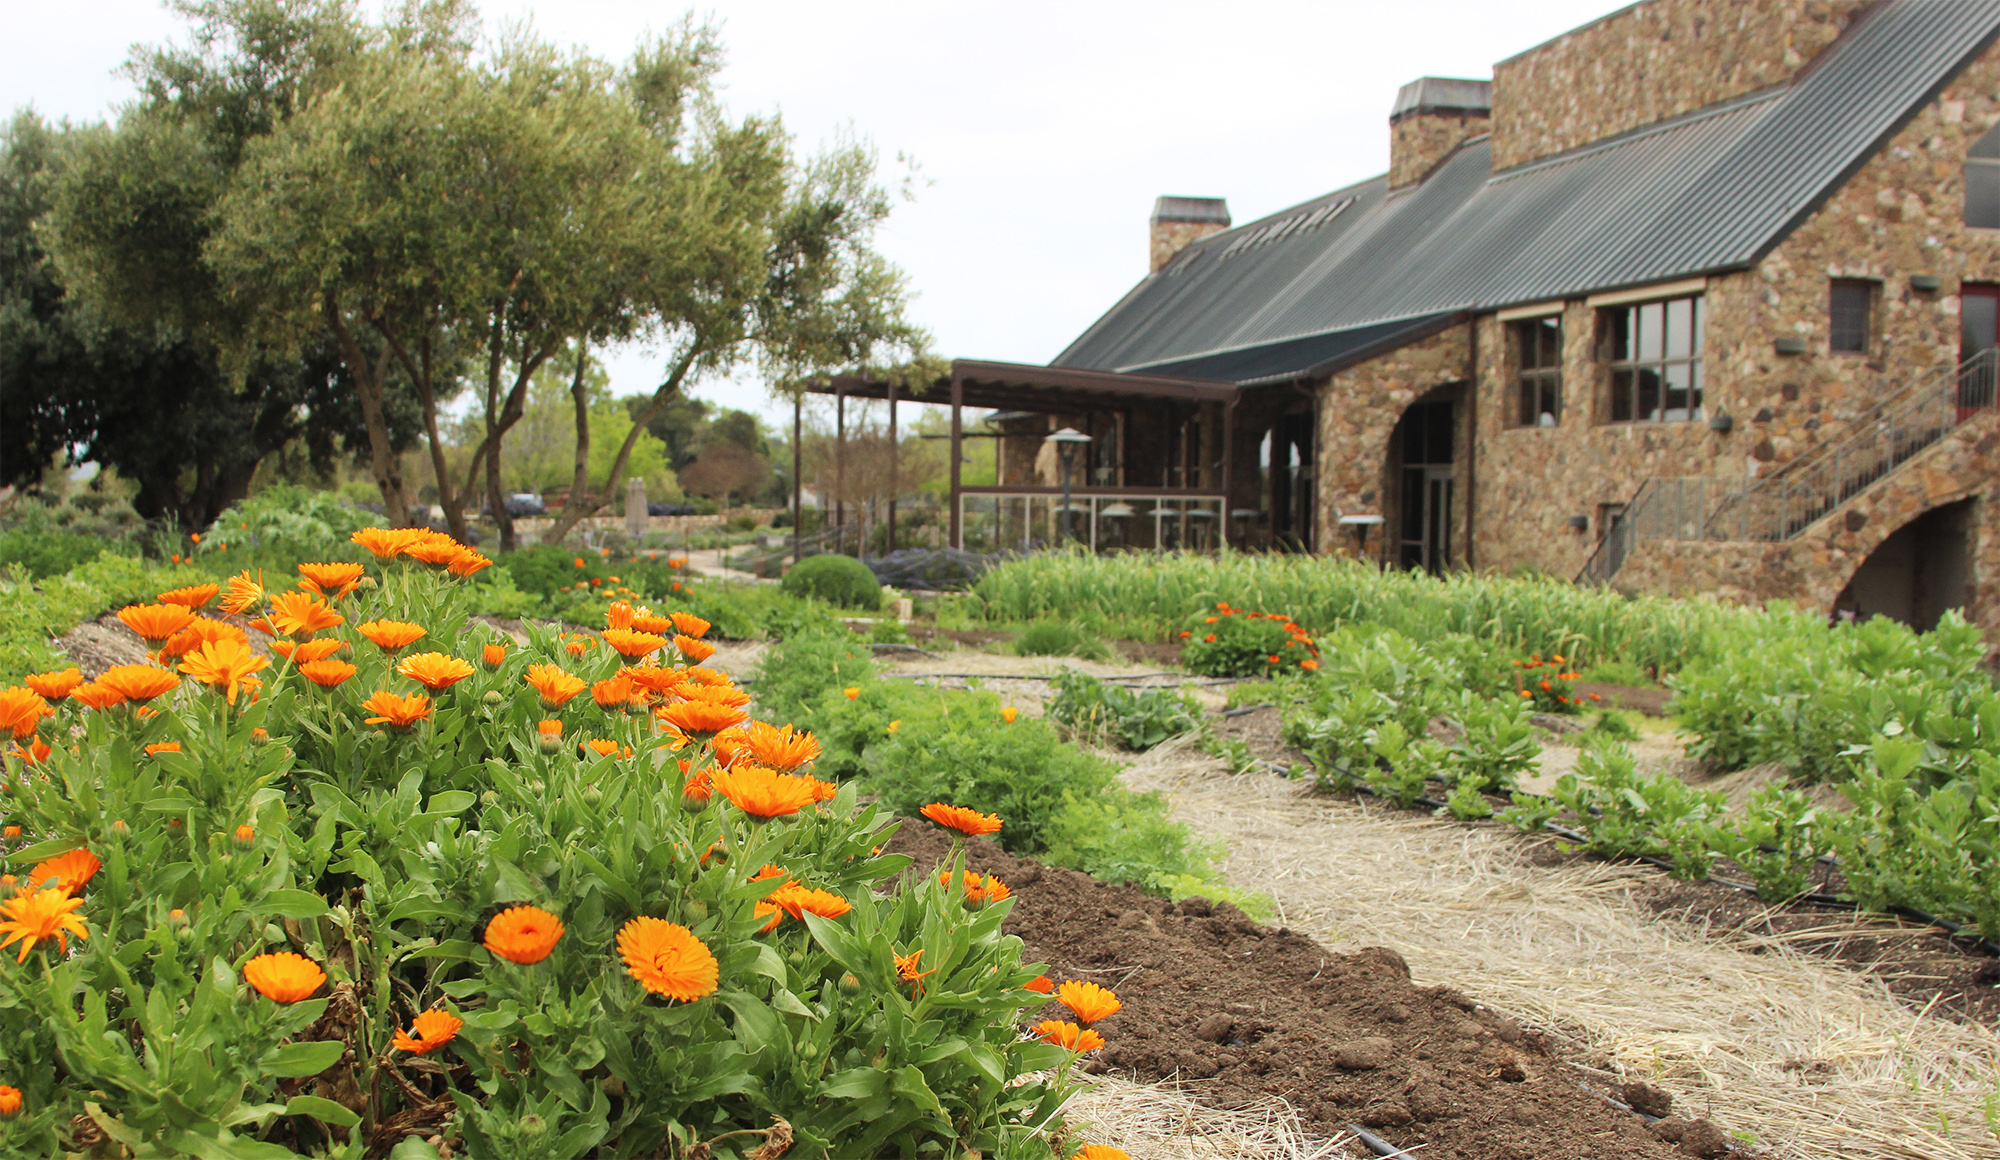 A view of orange calendula flowers in our garden, looking back at the tasting room